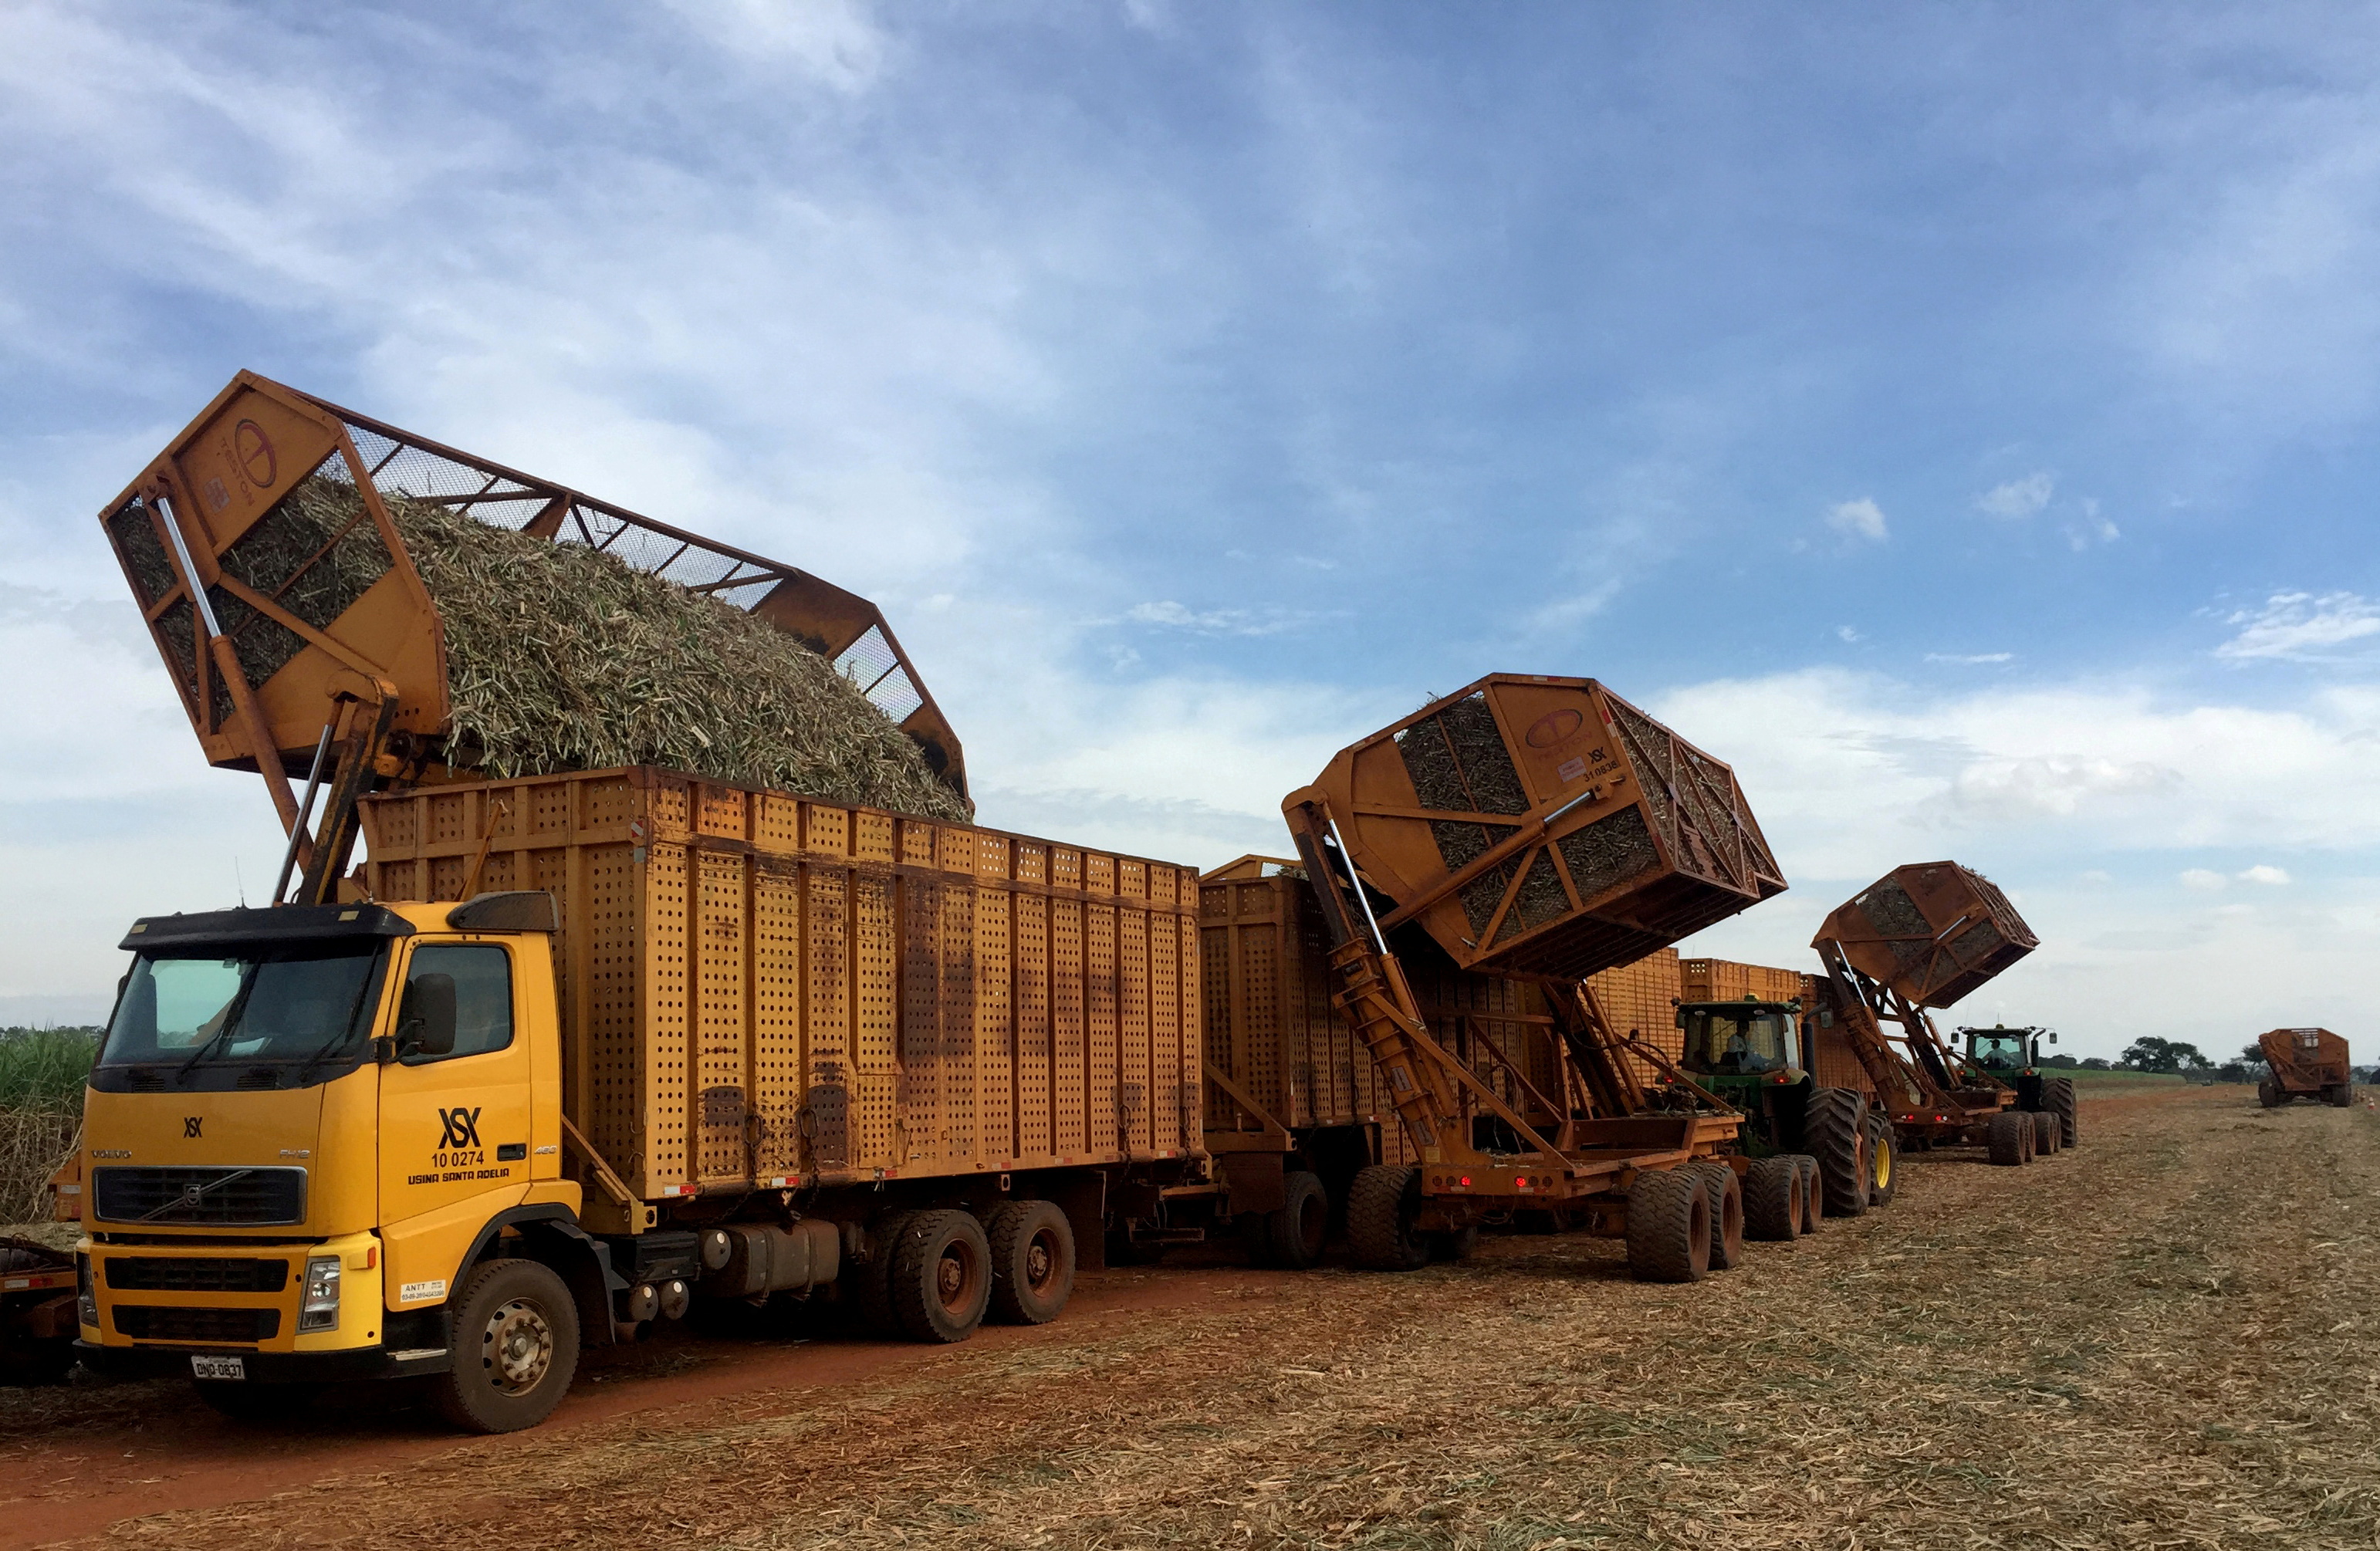 Tractors unload cane into a truck during harvest operations at Santa Adelia mill in Jaboticabal